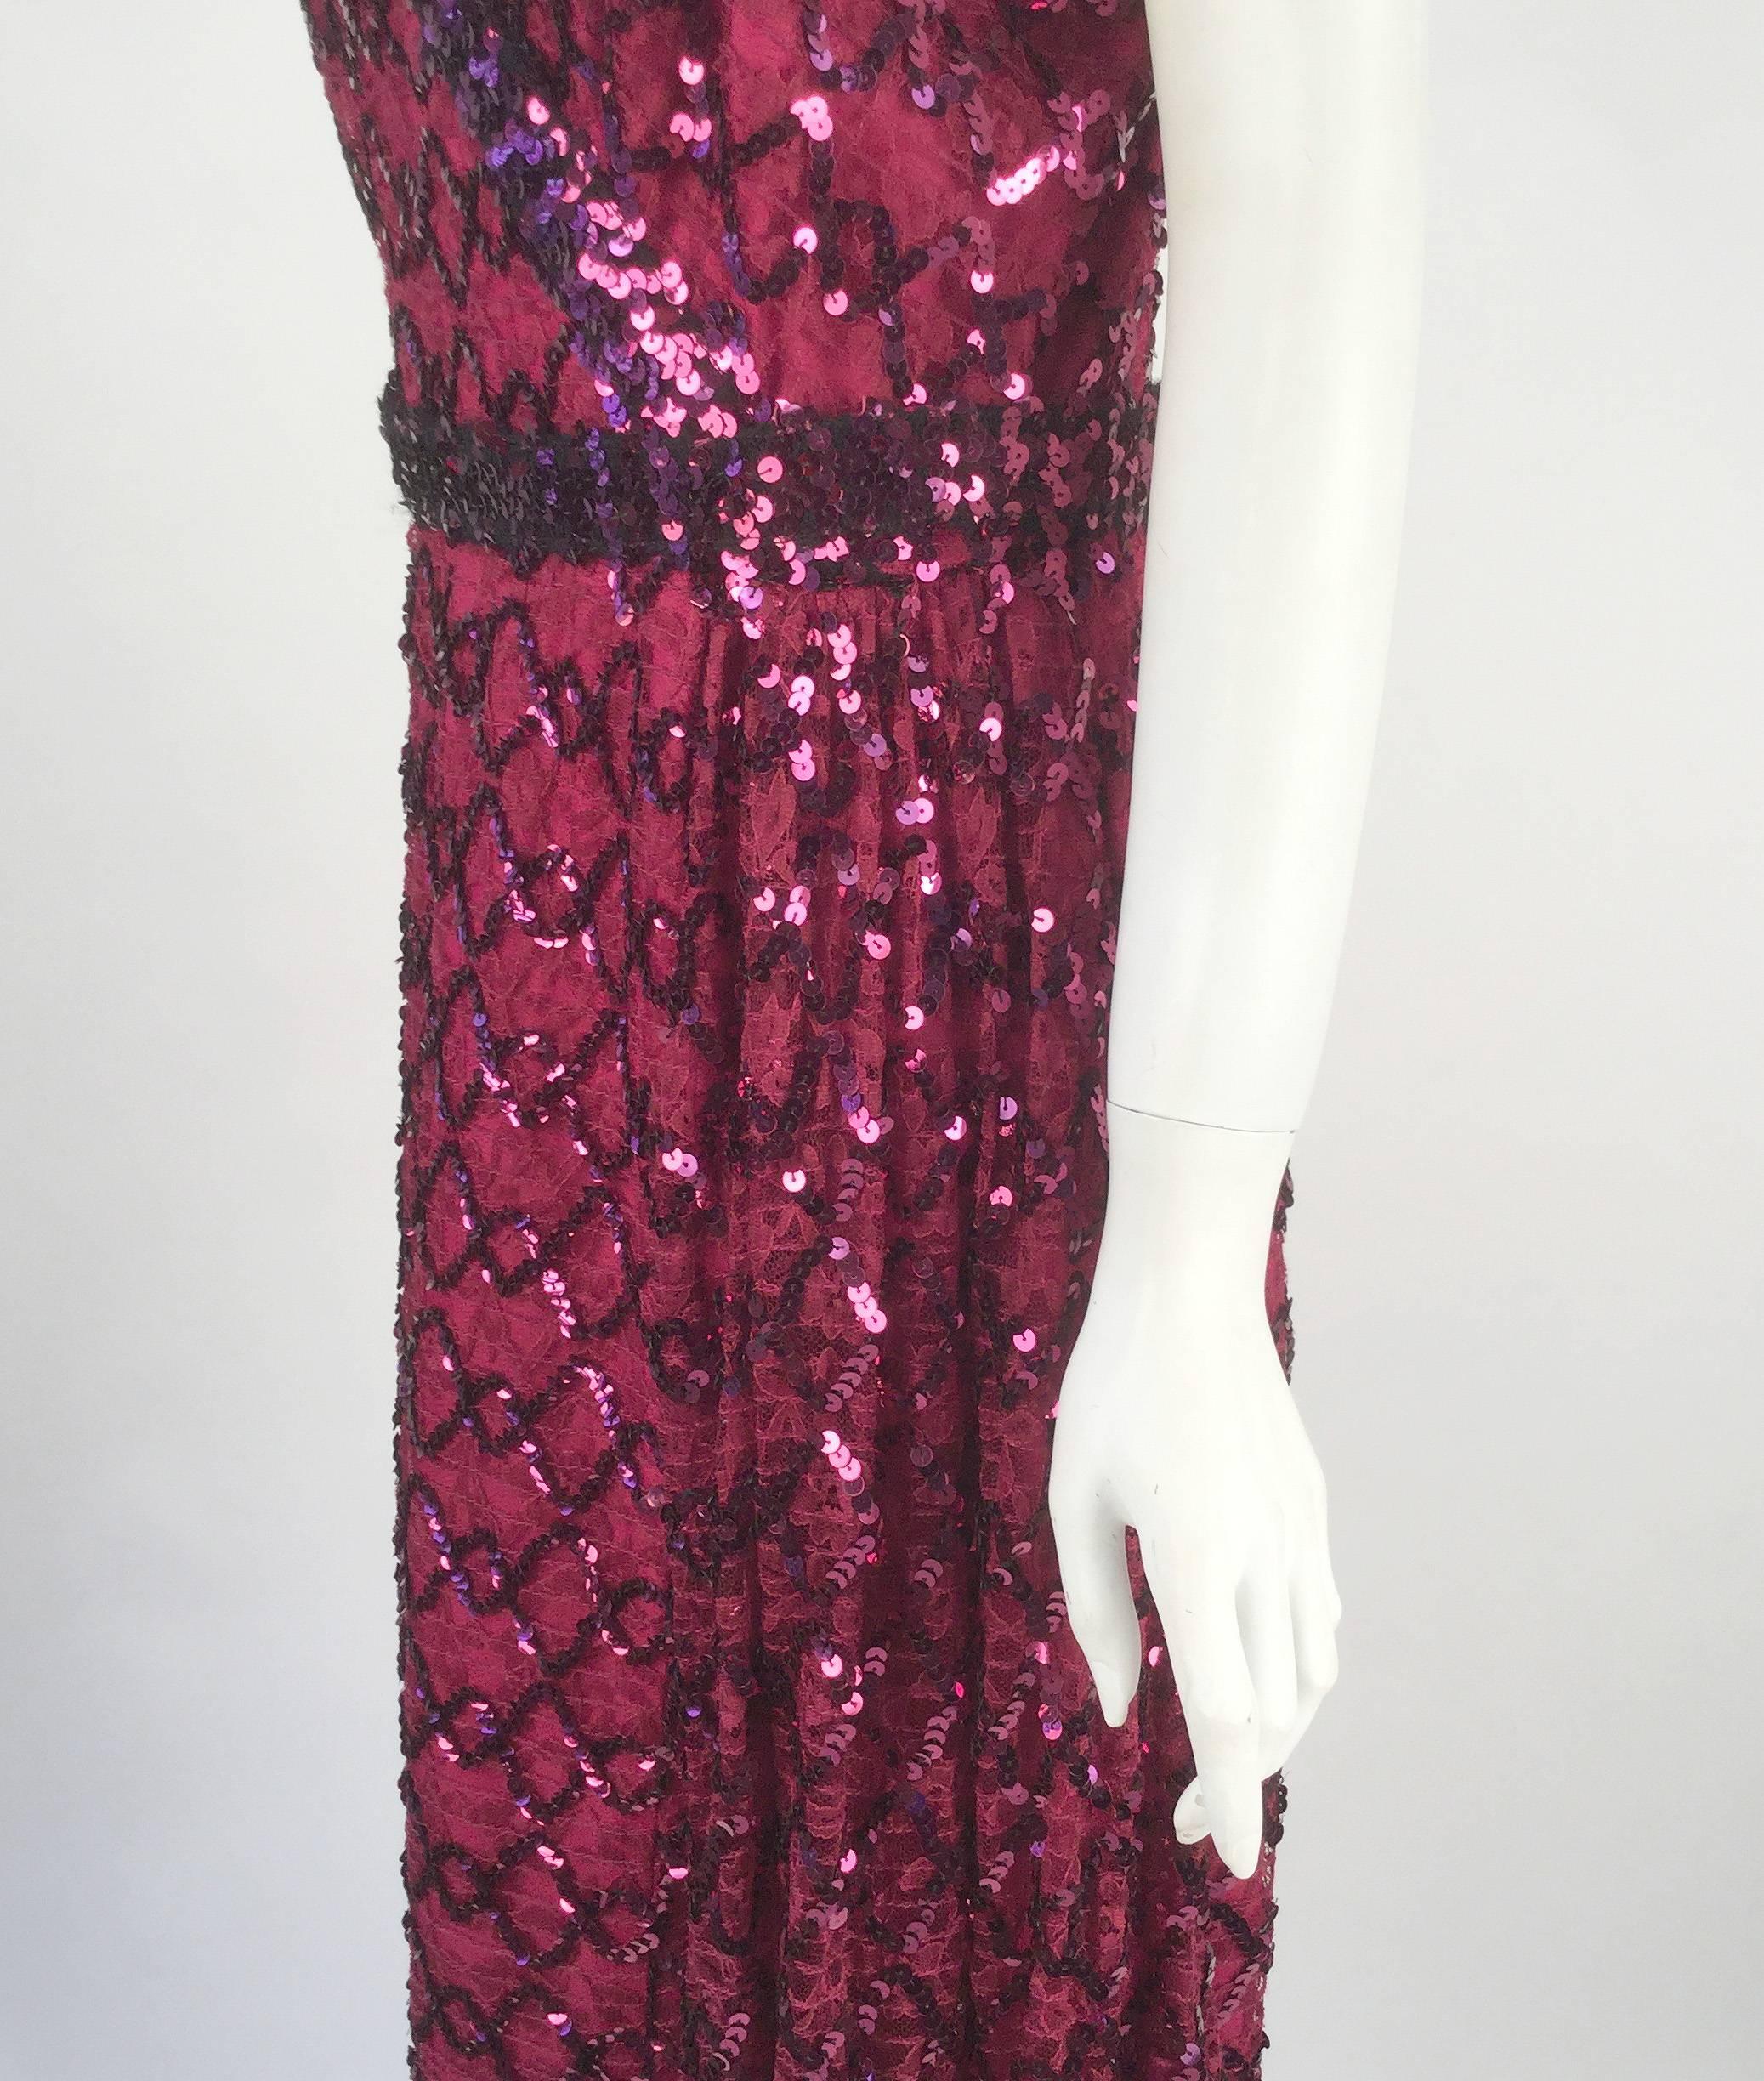 Lilli Diamond Maroon Sequined Evening Gown,  1970s  In Good Condition For Sale In Houston, TX